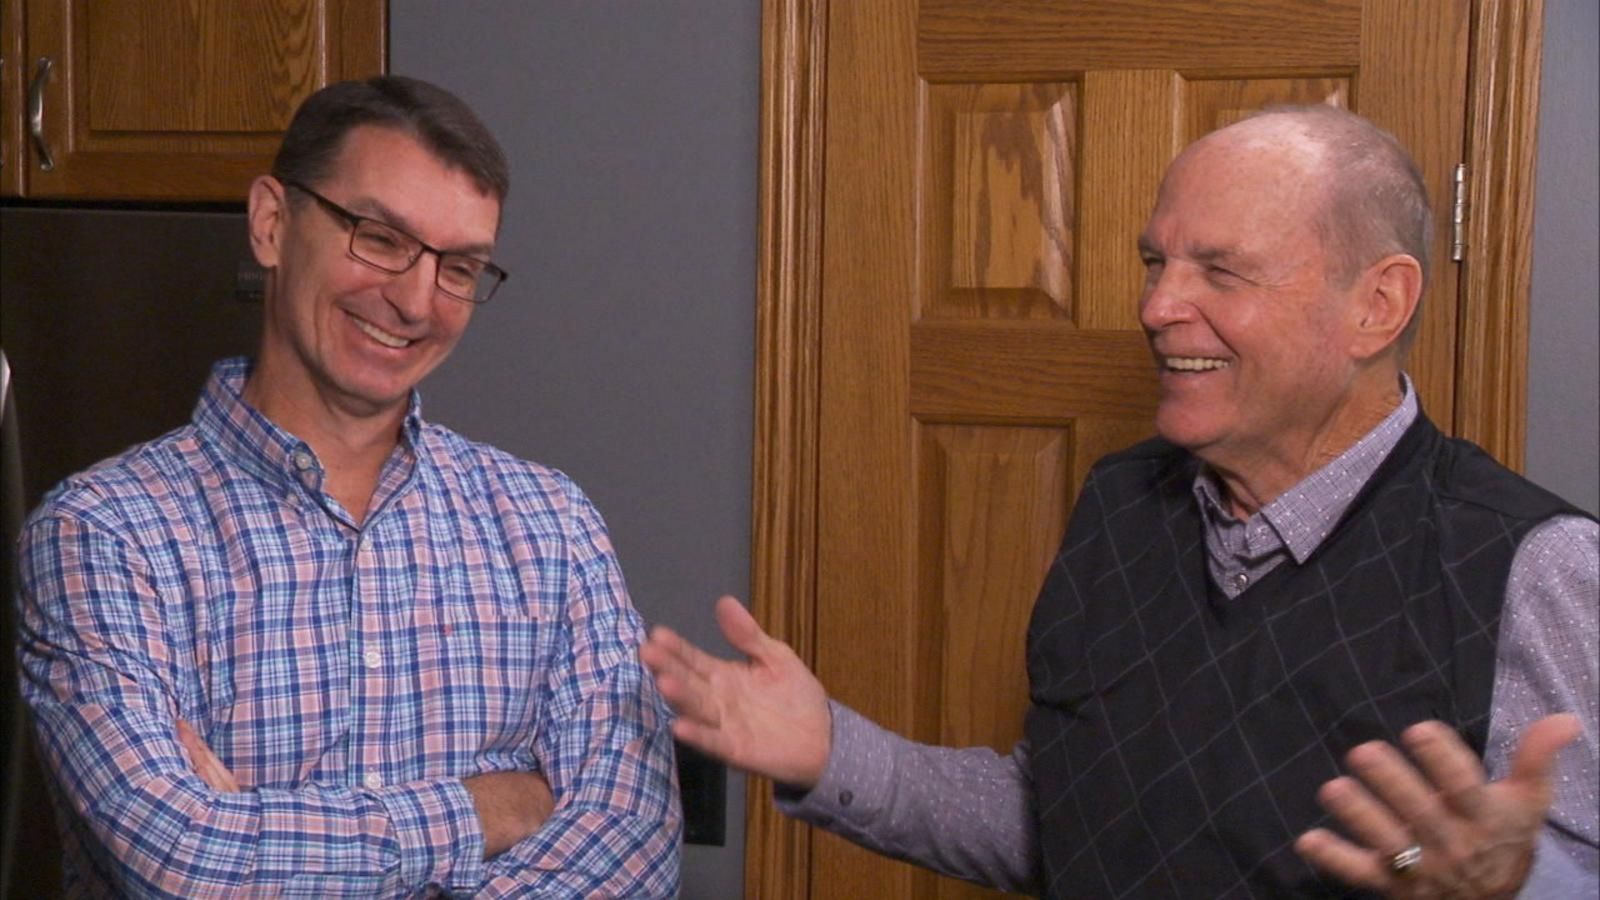 VIDEO: Father meets the son he never knew he had after Ancestry.com match